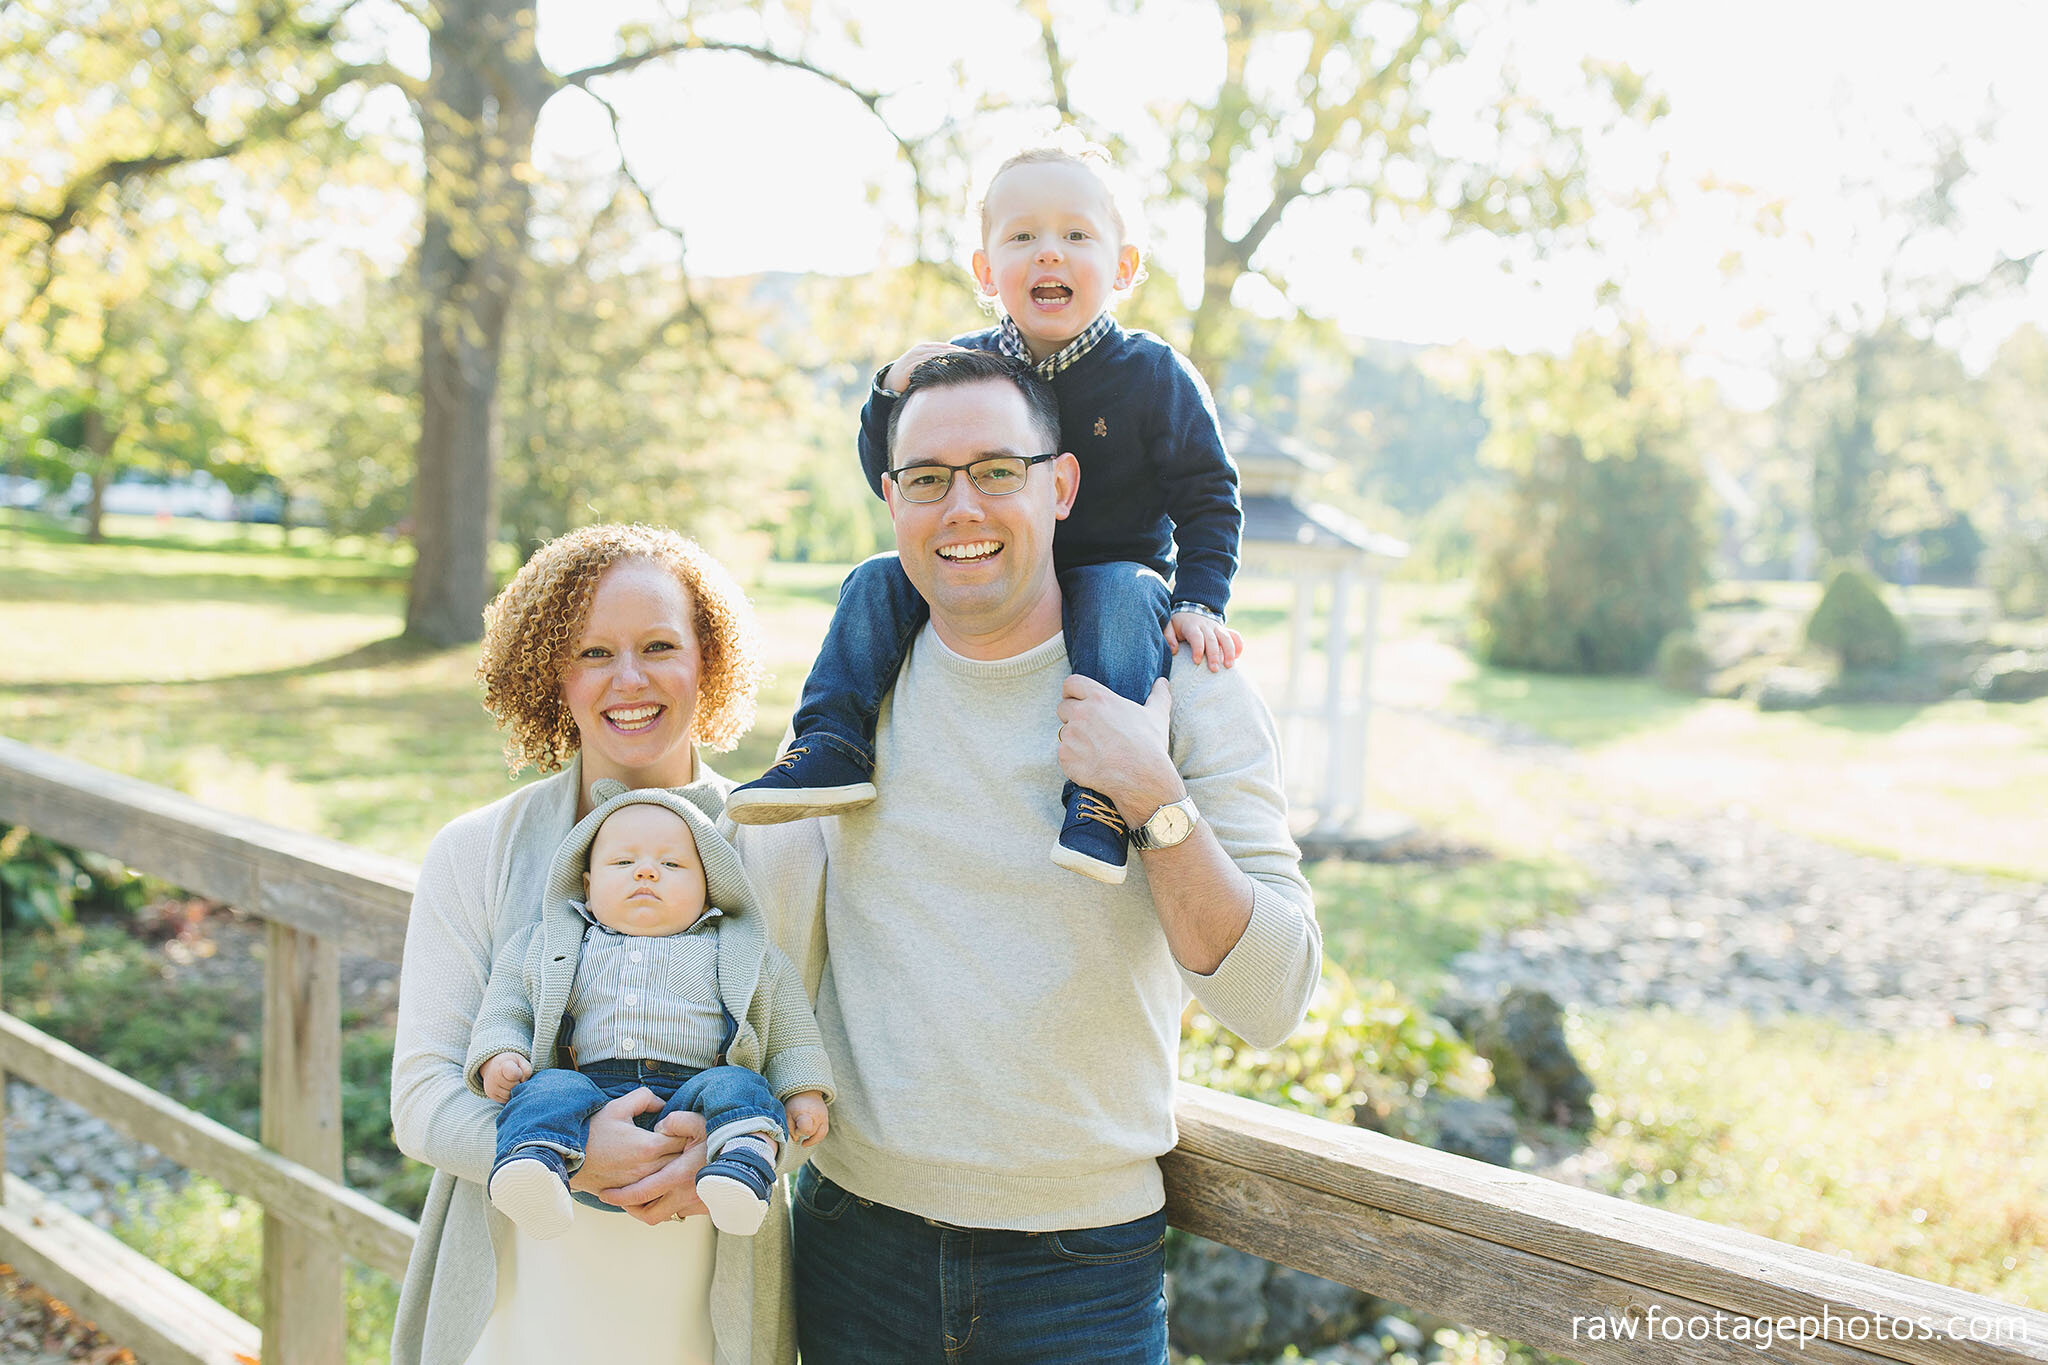 raw_footage_photography-london_ontario_family_photographer-fall_extended_family_session-grandparents-009.jpg